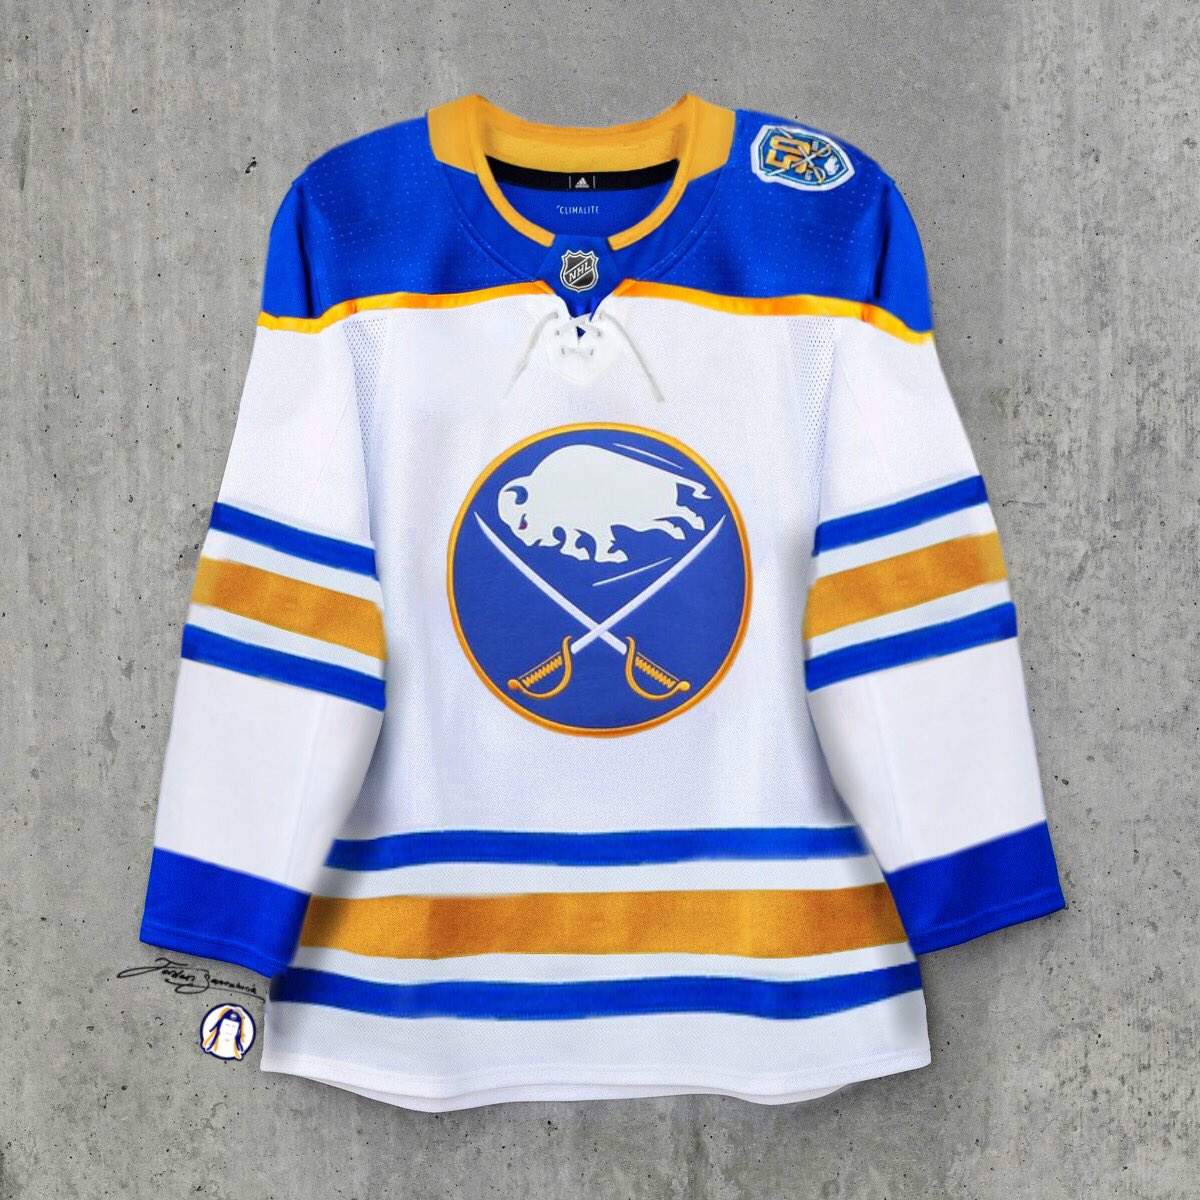 Jordan Santalucia on X: Here's some Buffalo Sabres jersey concepts. This  year will be the return to royal blue & keeping the 50th anniversary  jerseys. With these I was going for what